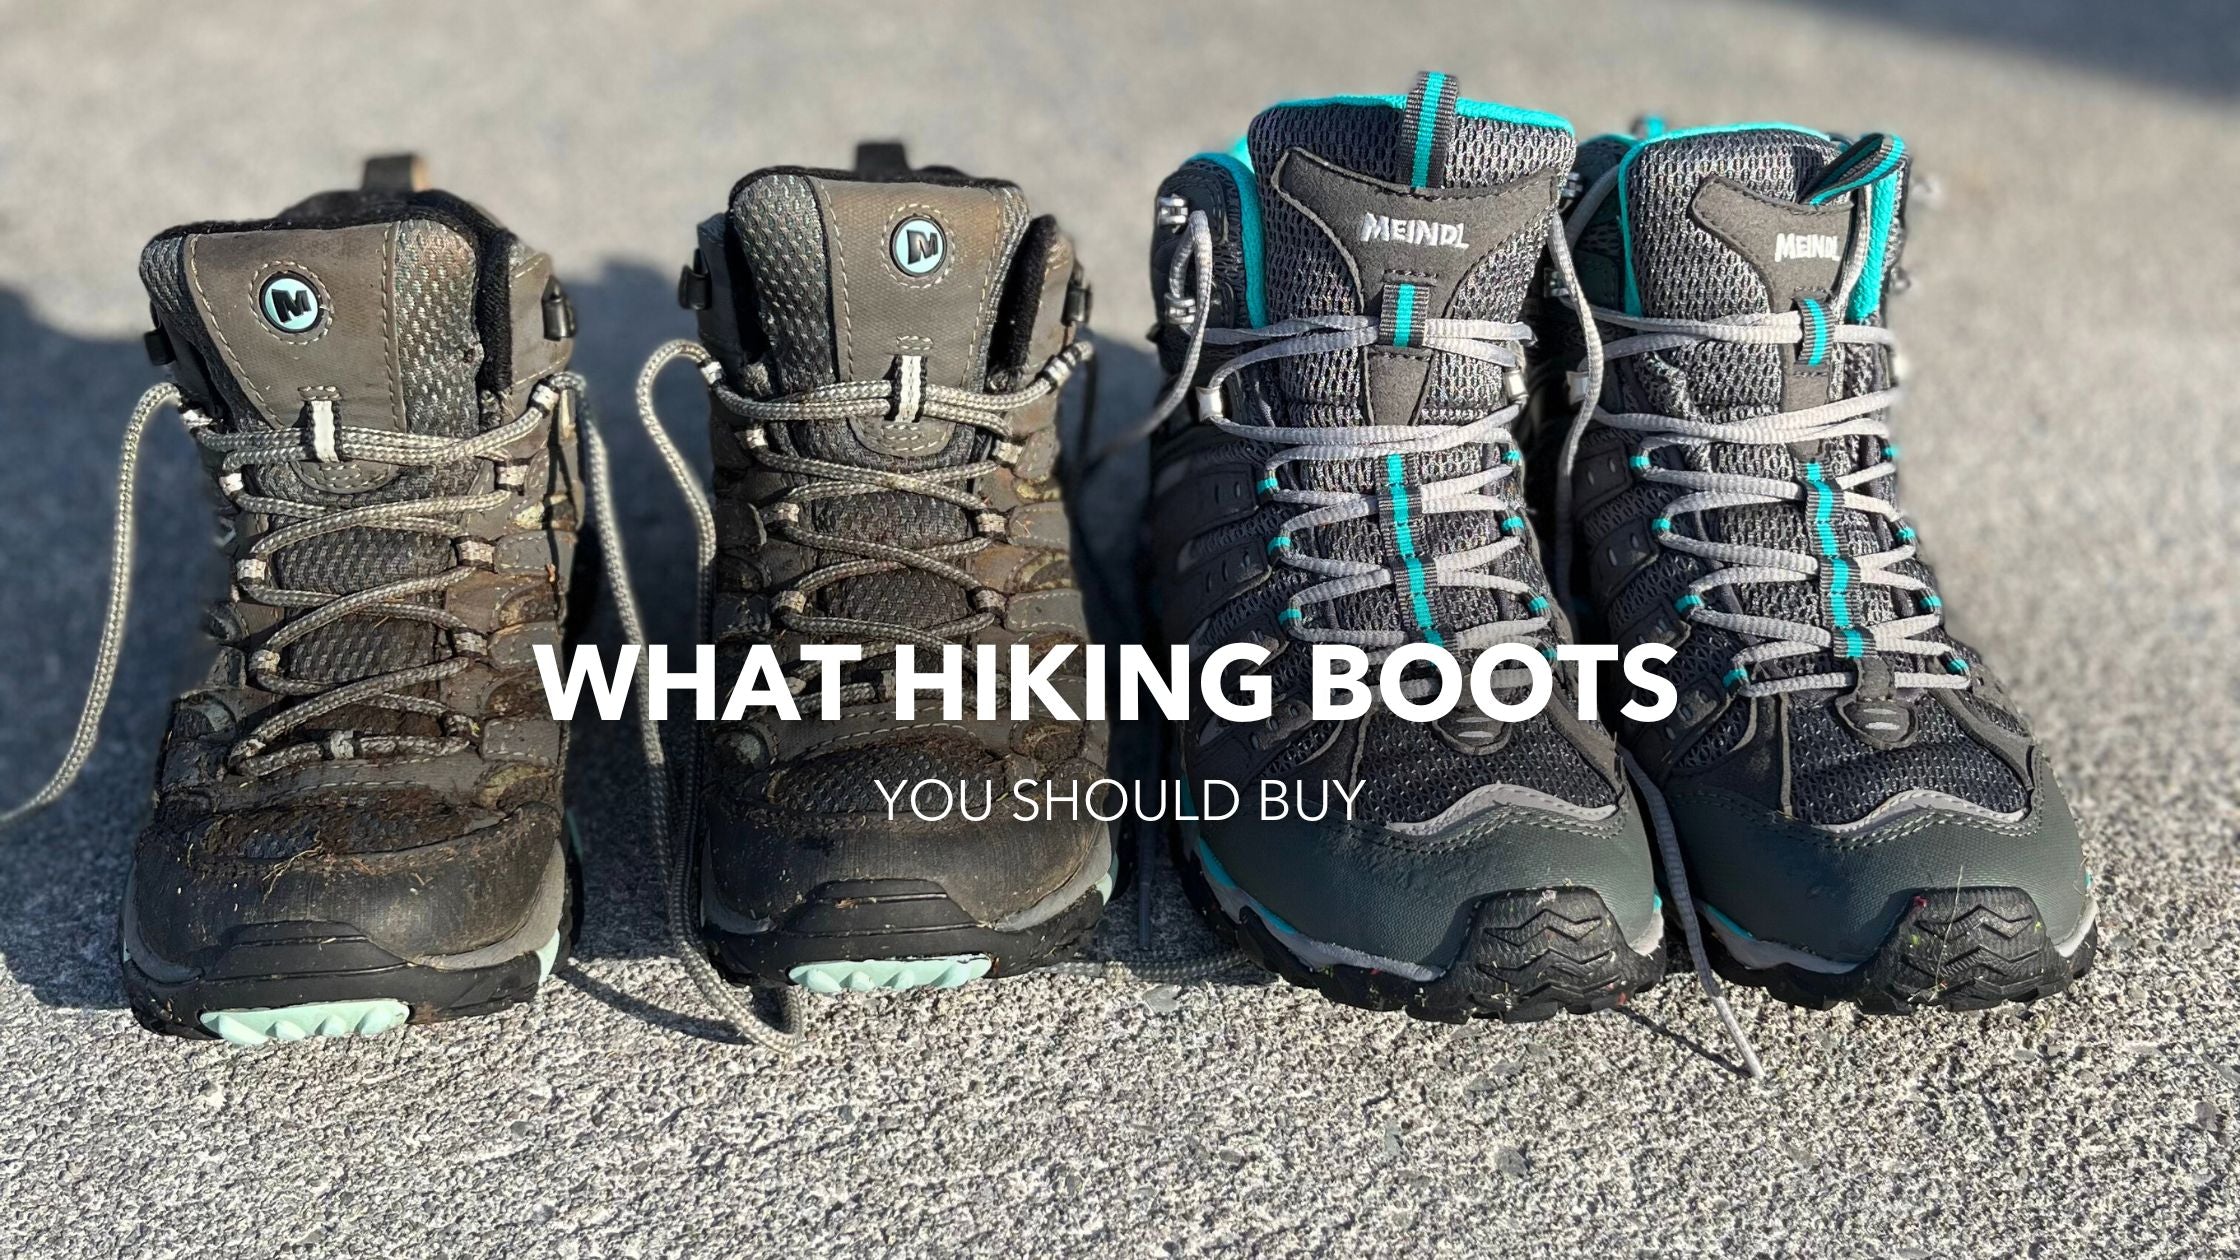 What Hiking Boots Should You Buy?